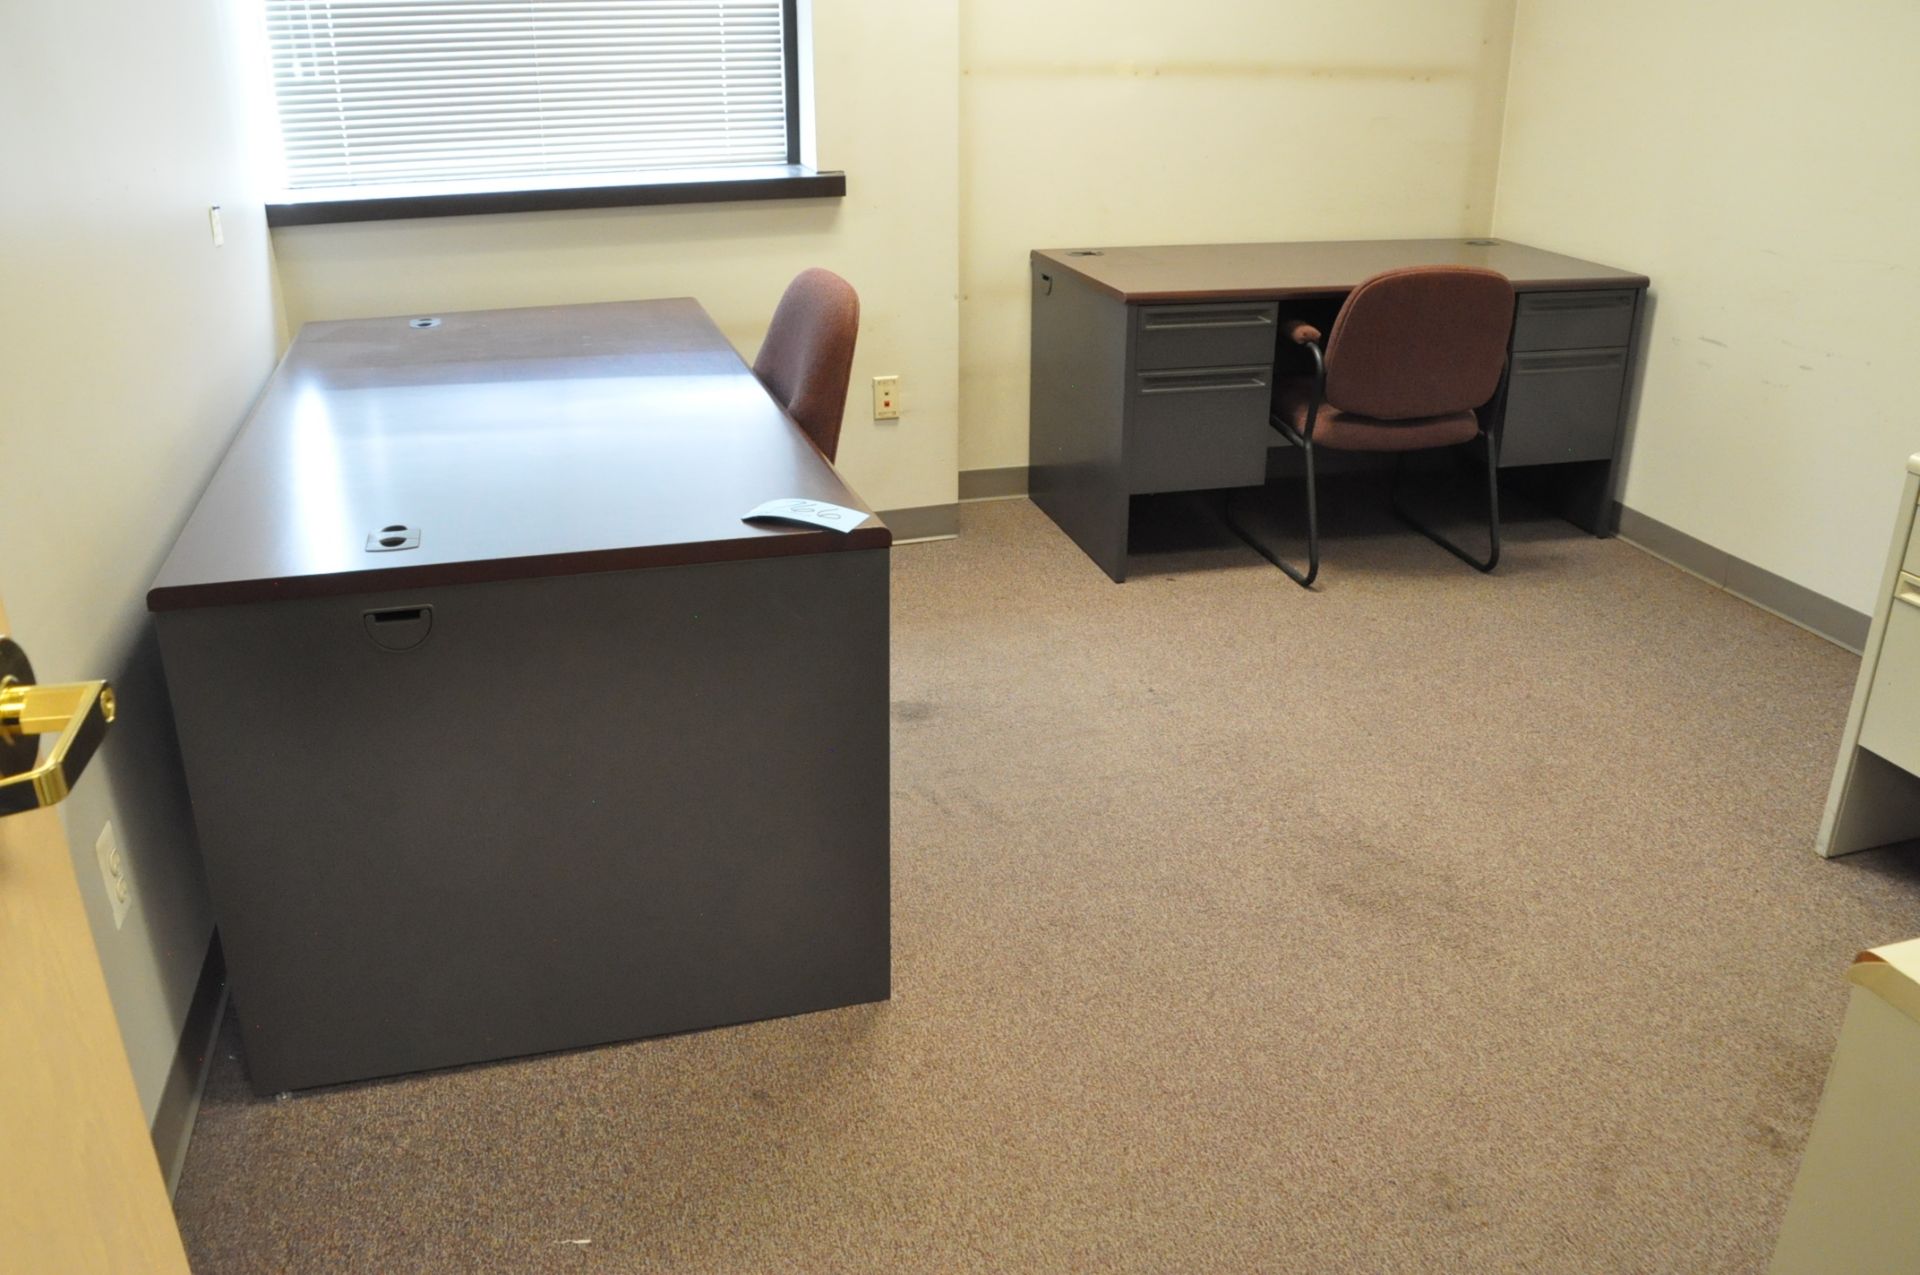 Lot-(6) Desks, (5) Chairs, (1) File Cabinet, (2) Bookcases and (1) Table in (2) Offices - Image 5 of 6